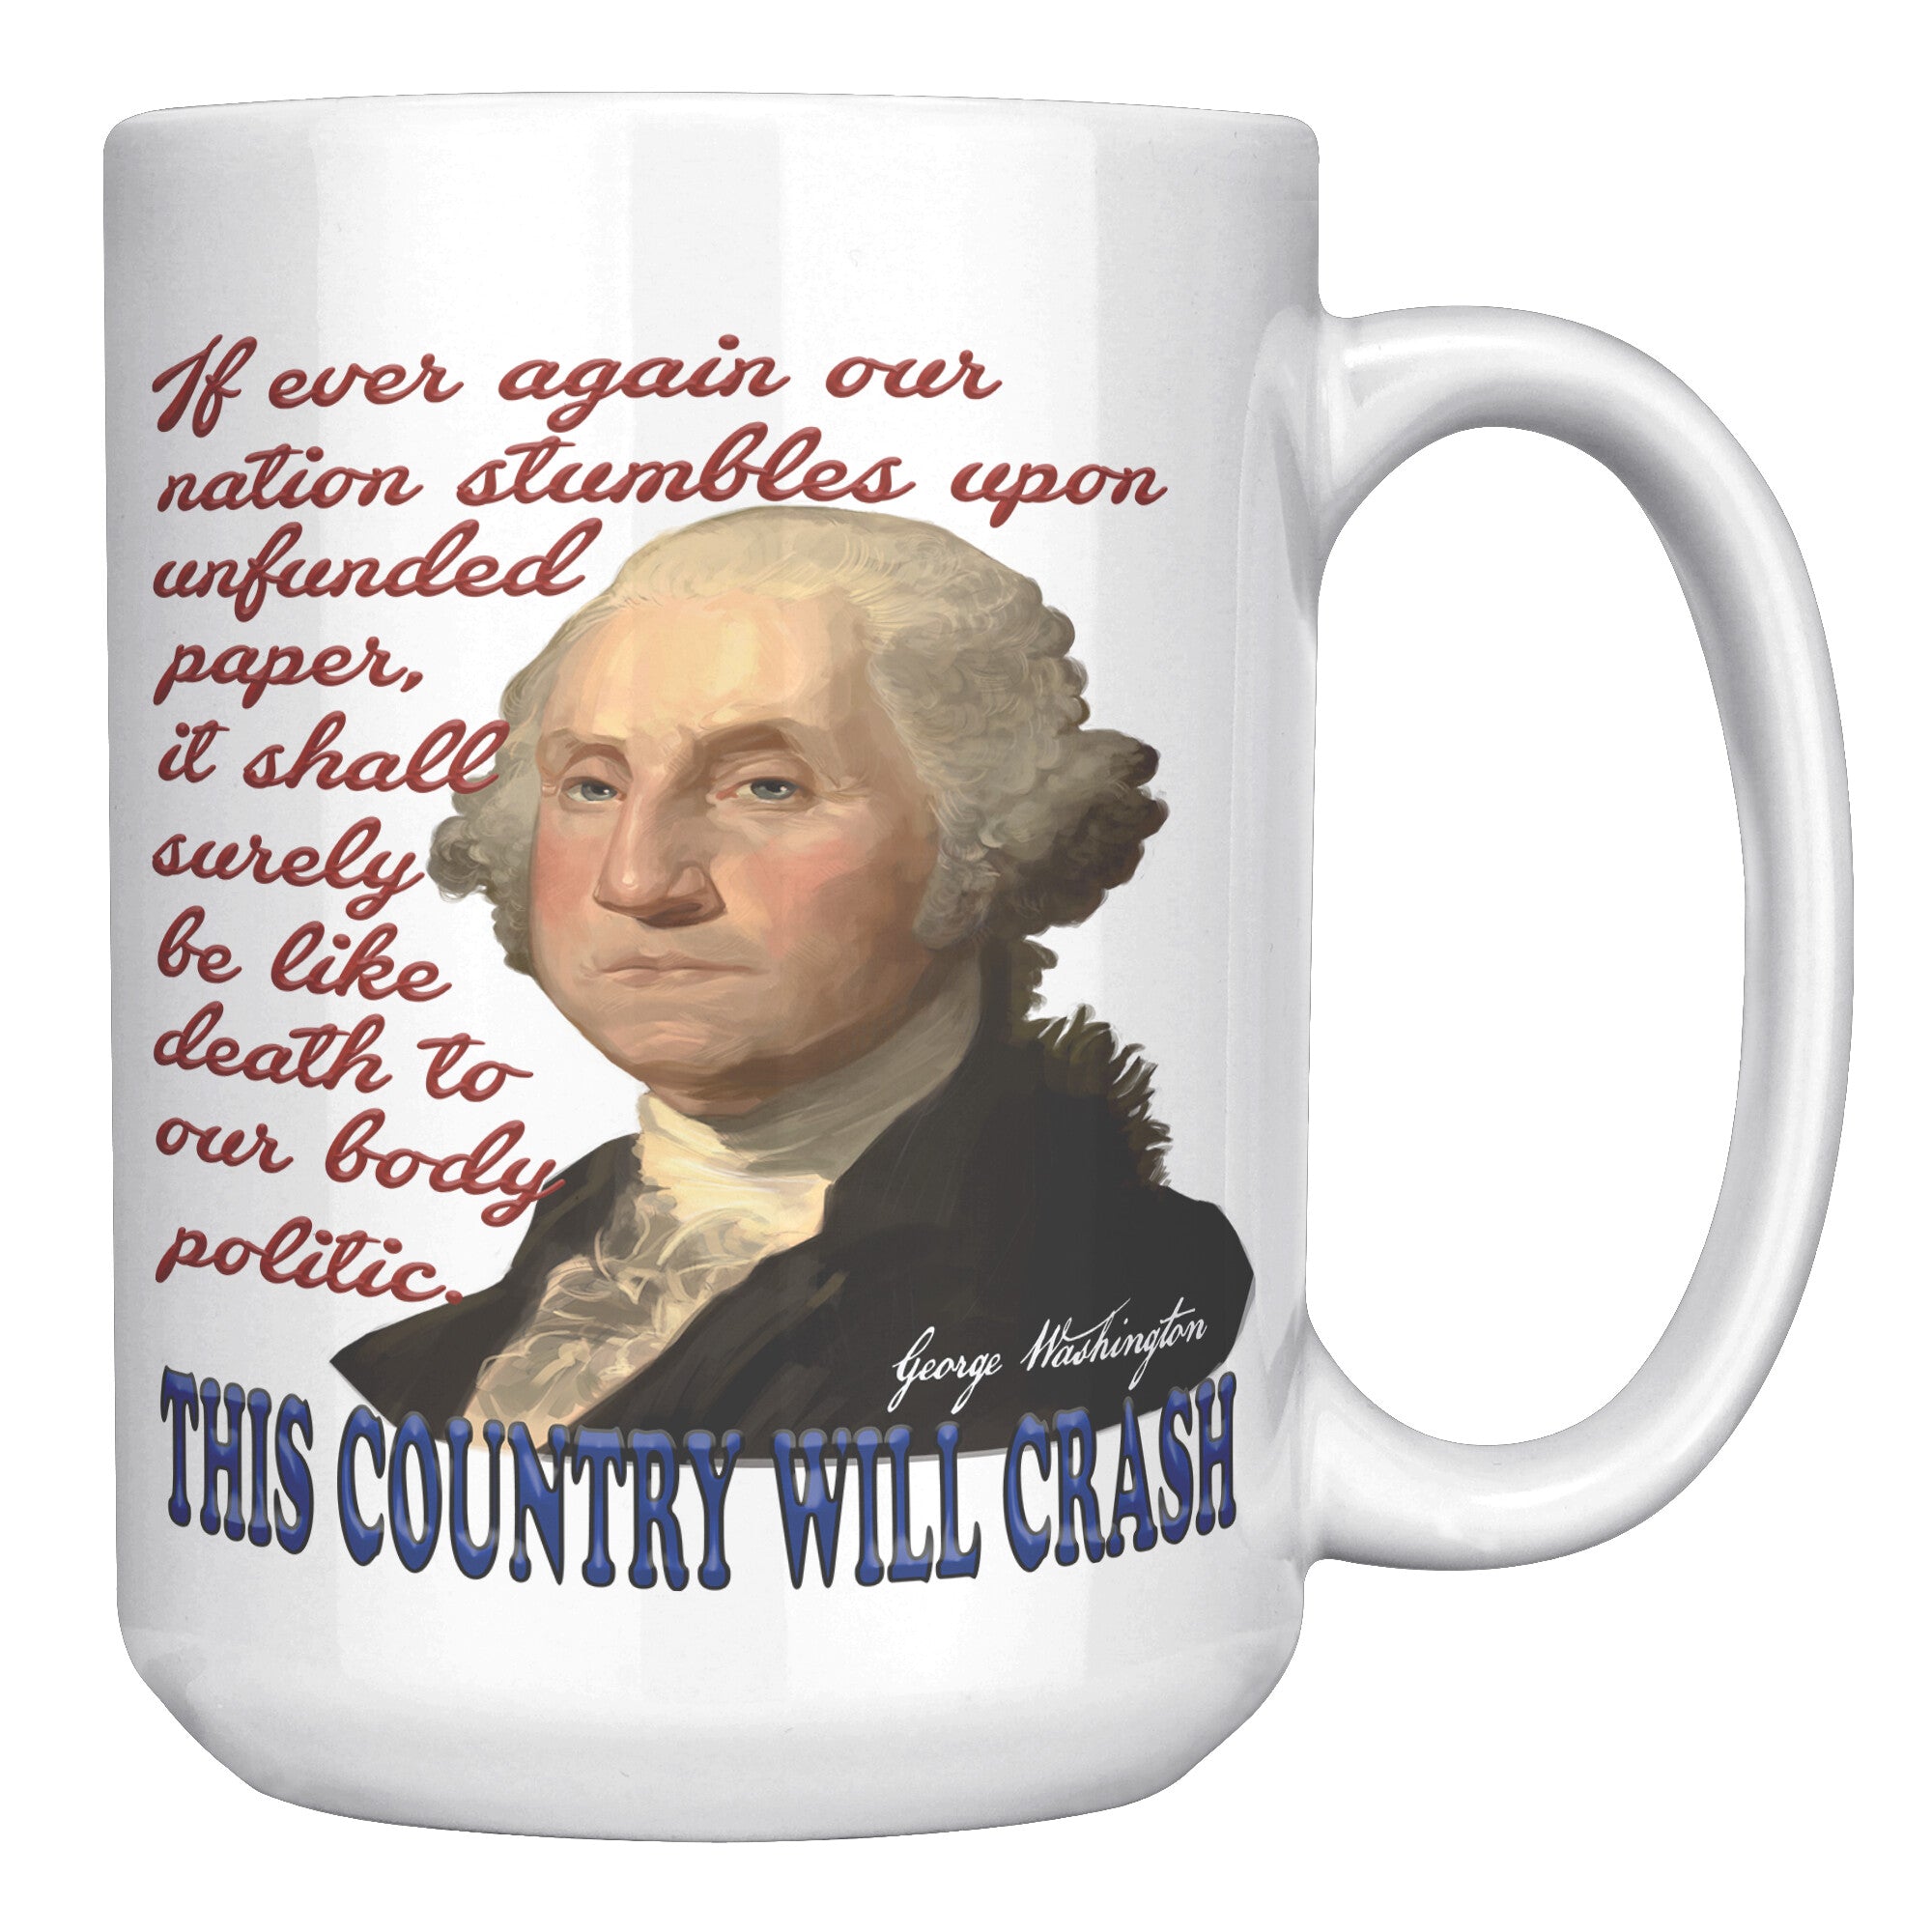 GEORGE WASHINGTON  -IF EVER AGAIN OUR COUNTRY STUMBLES UPON UNFUNDED PAPER